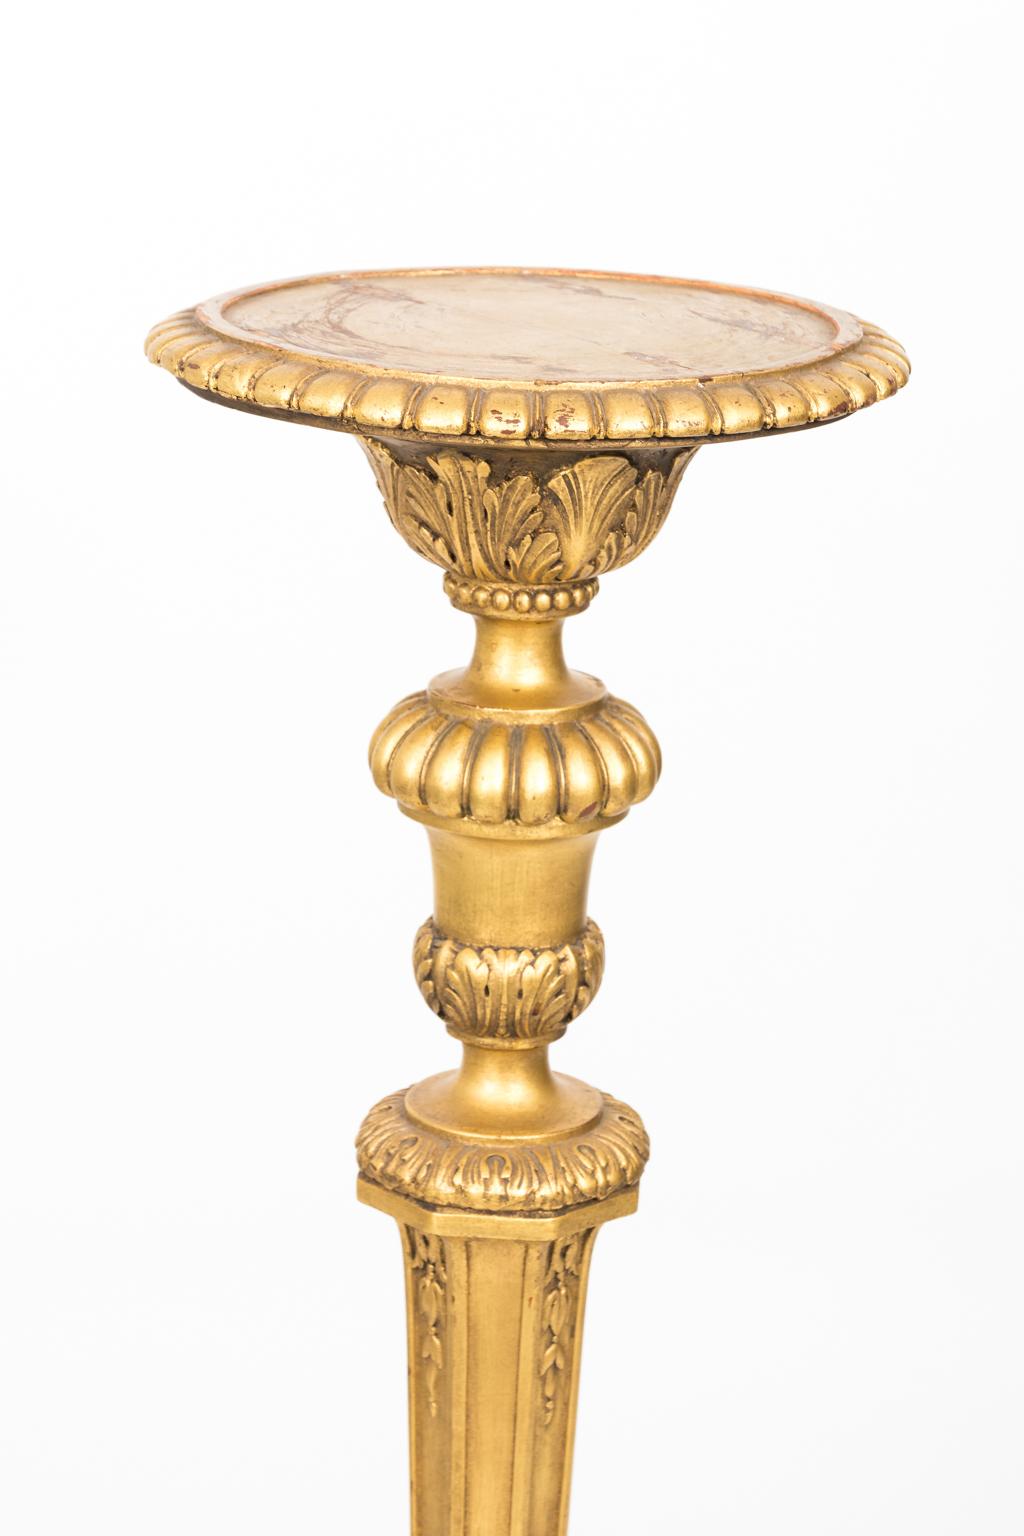 George III style stands in giltwood, circa late 19th century. The stands are carved with acanthus leaves, gadroon trim, and detailed lion's paw feet. Please note that there is wear consistent with age especially on the top where there is a